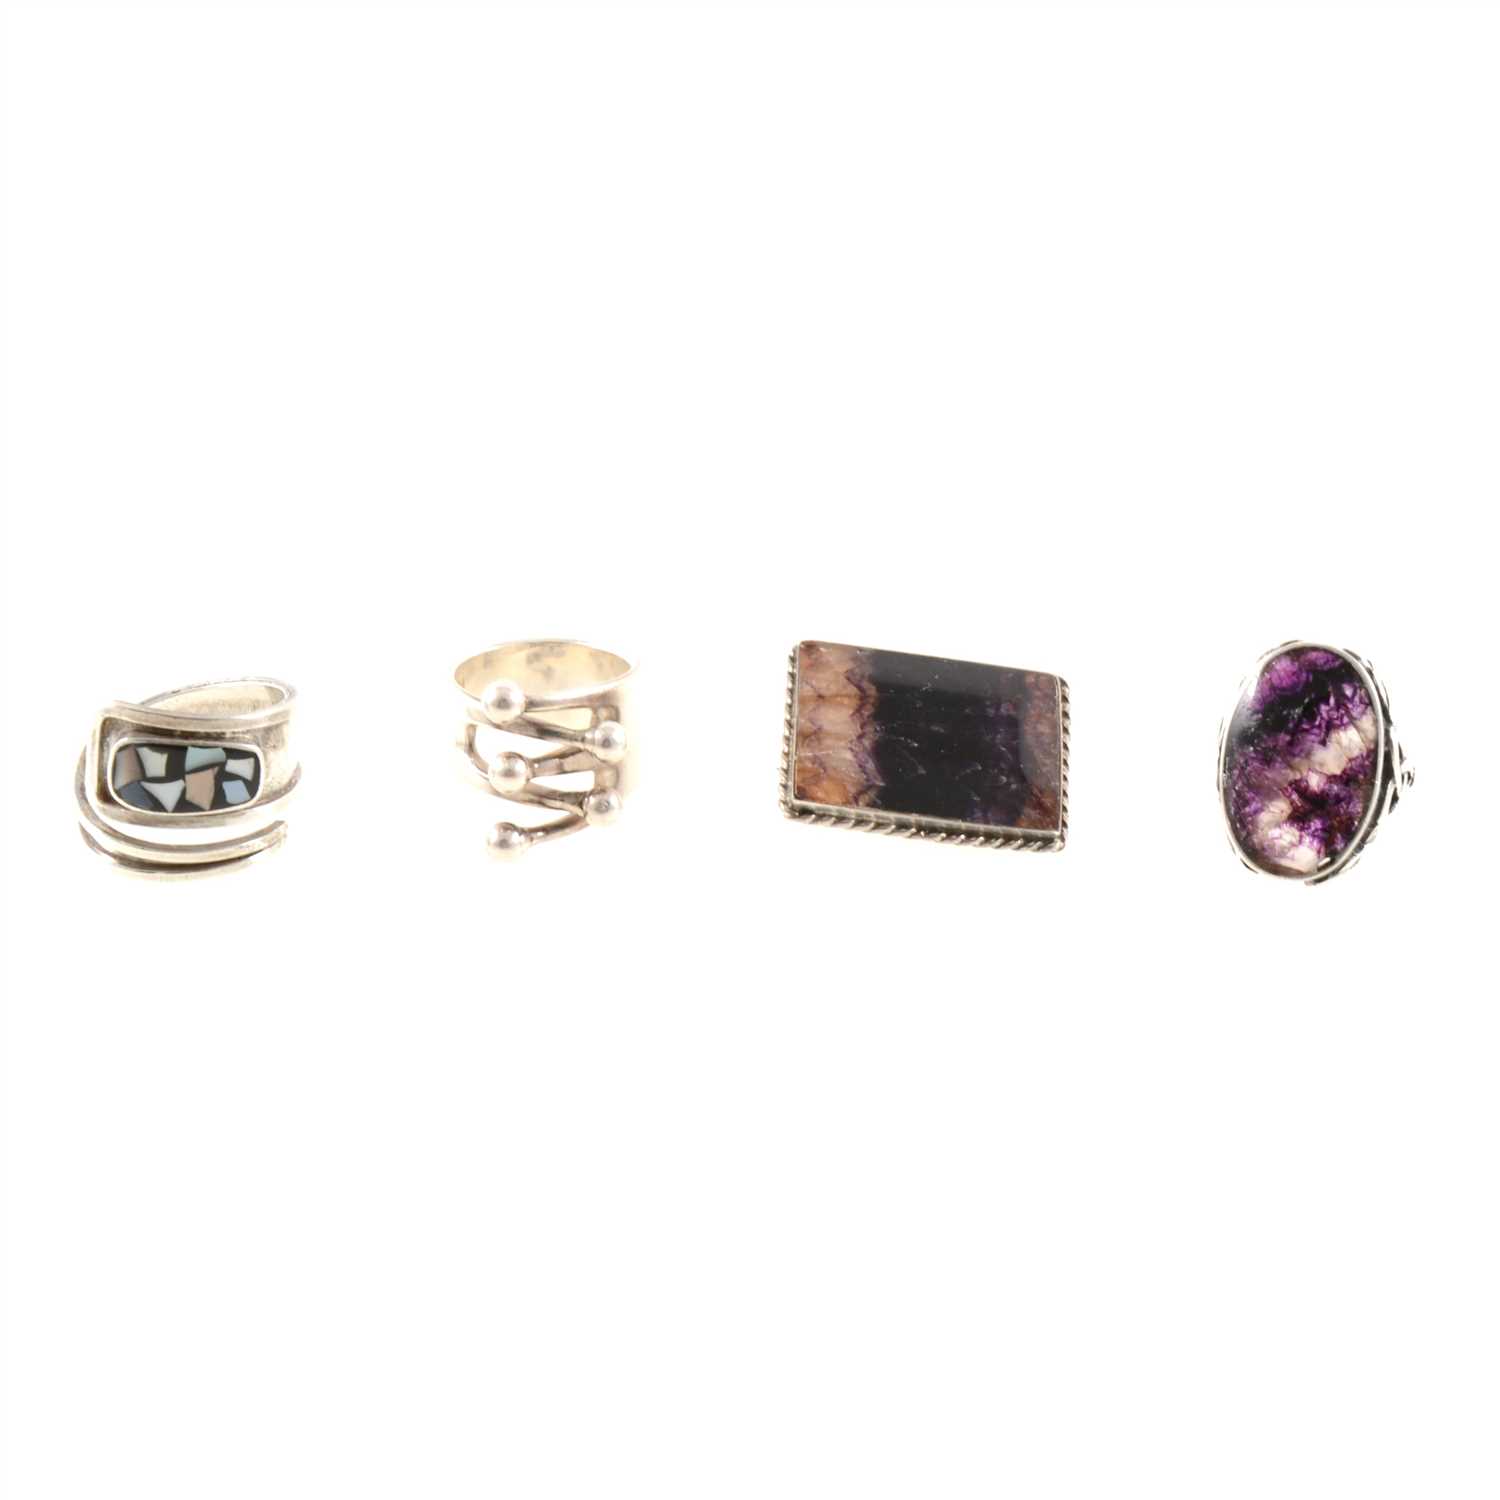 Lot 226 - A silver ring and brooch set with blue john, and two vintage chunky silver rings from Norway and Israel.